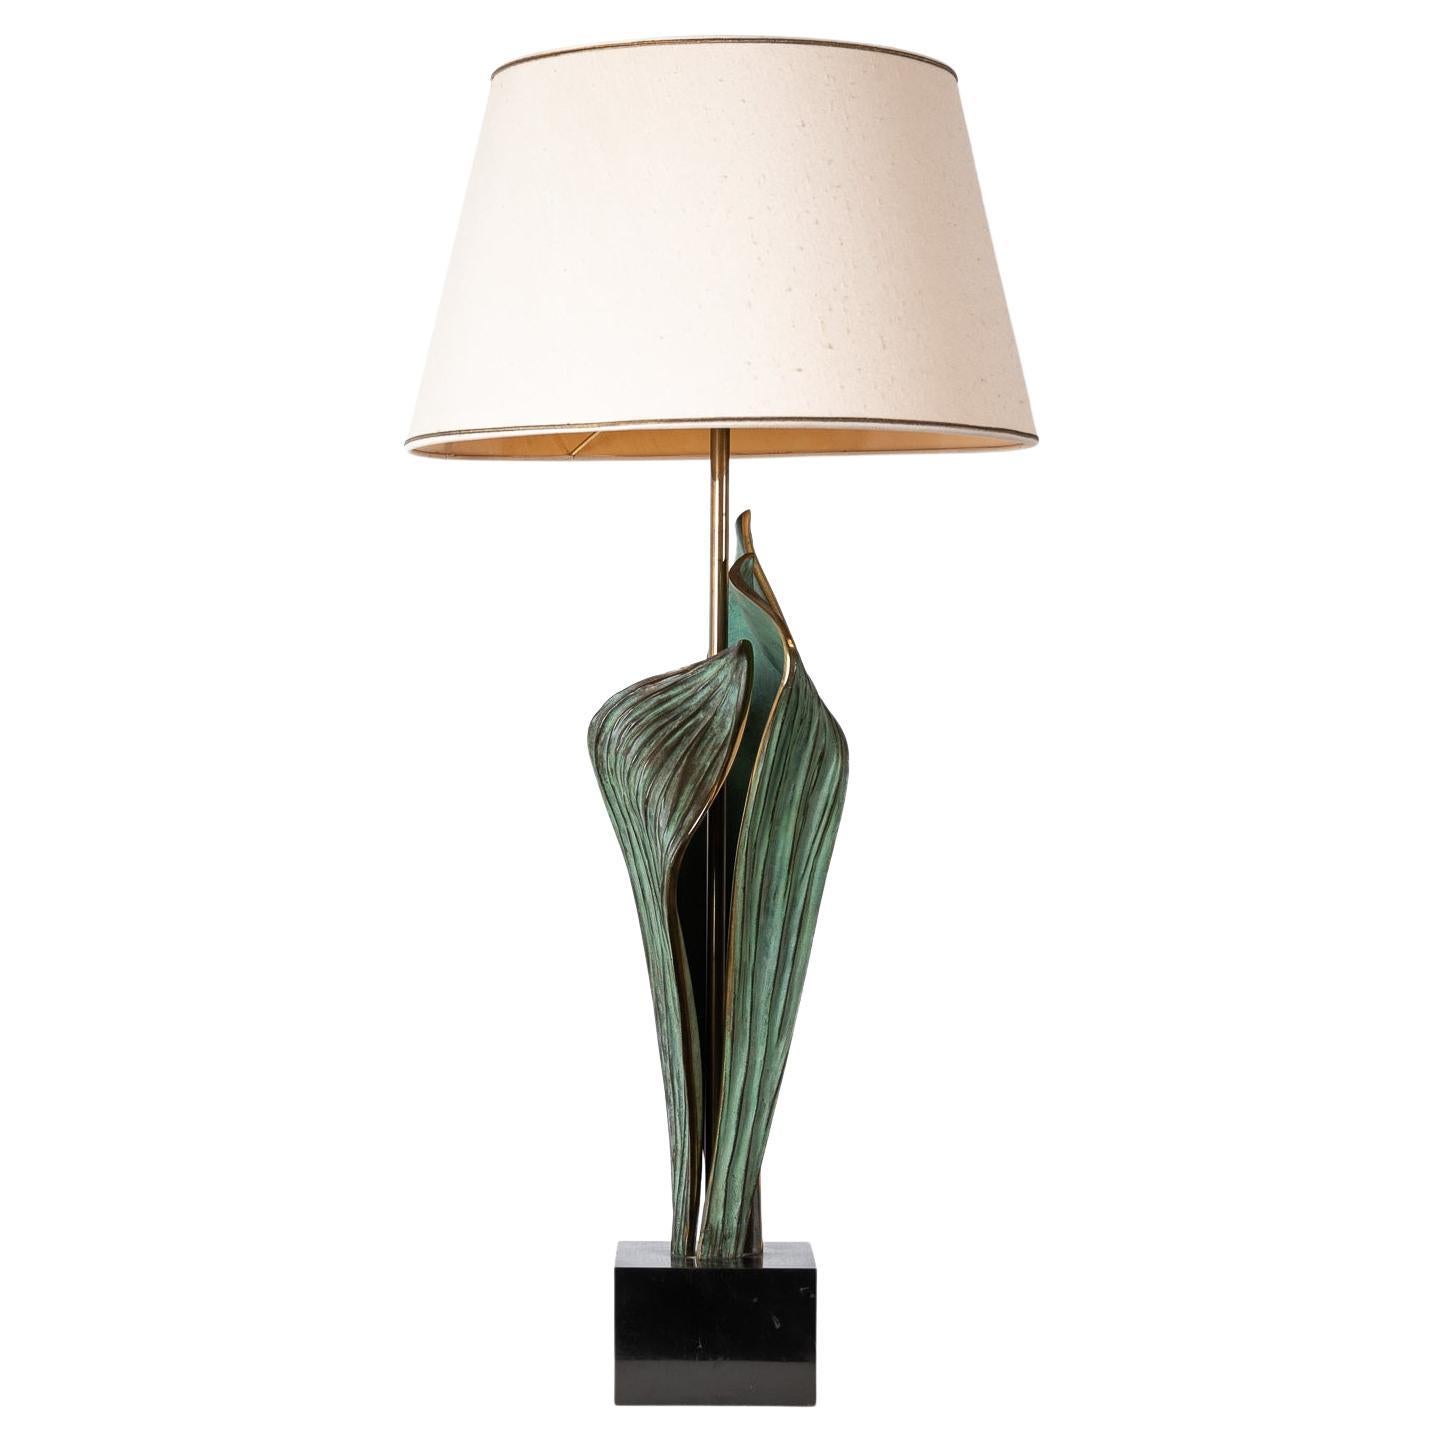 Amaryllis Model Table Lamp by Chrystiane Charles for Maison Charles